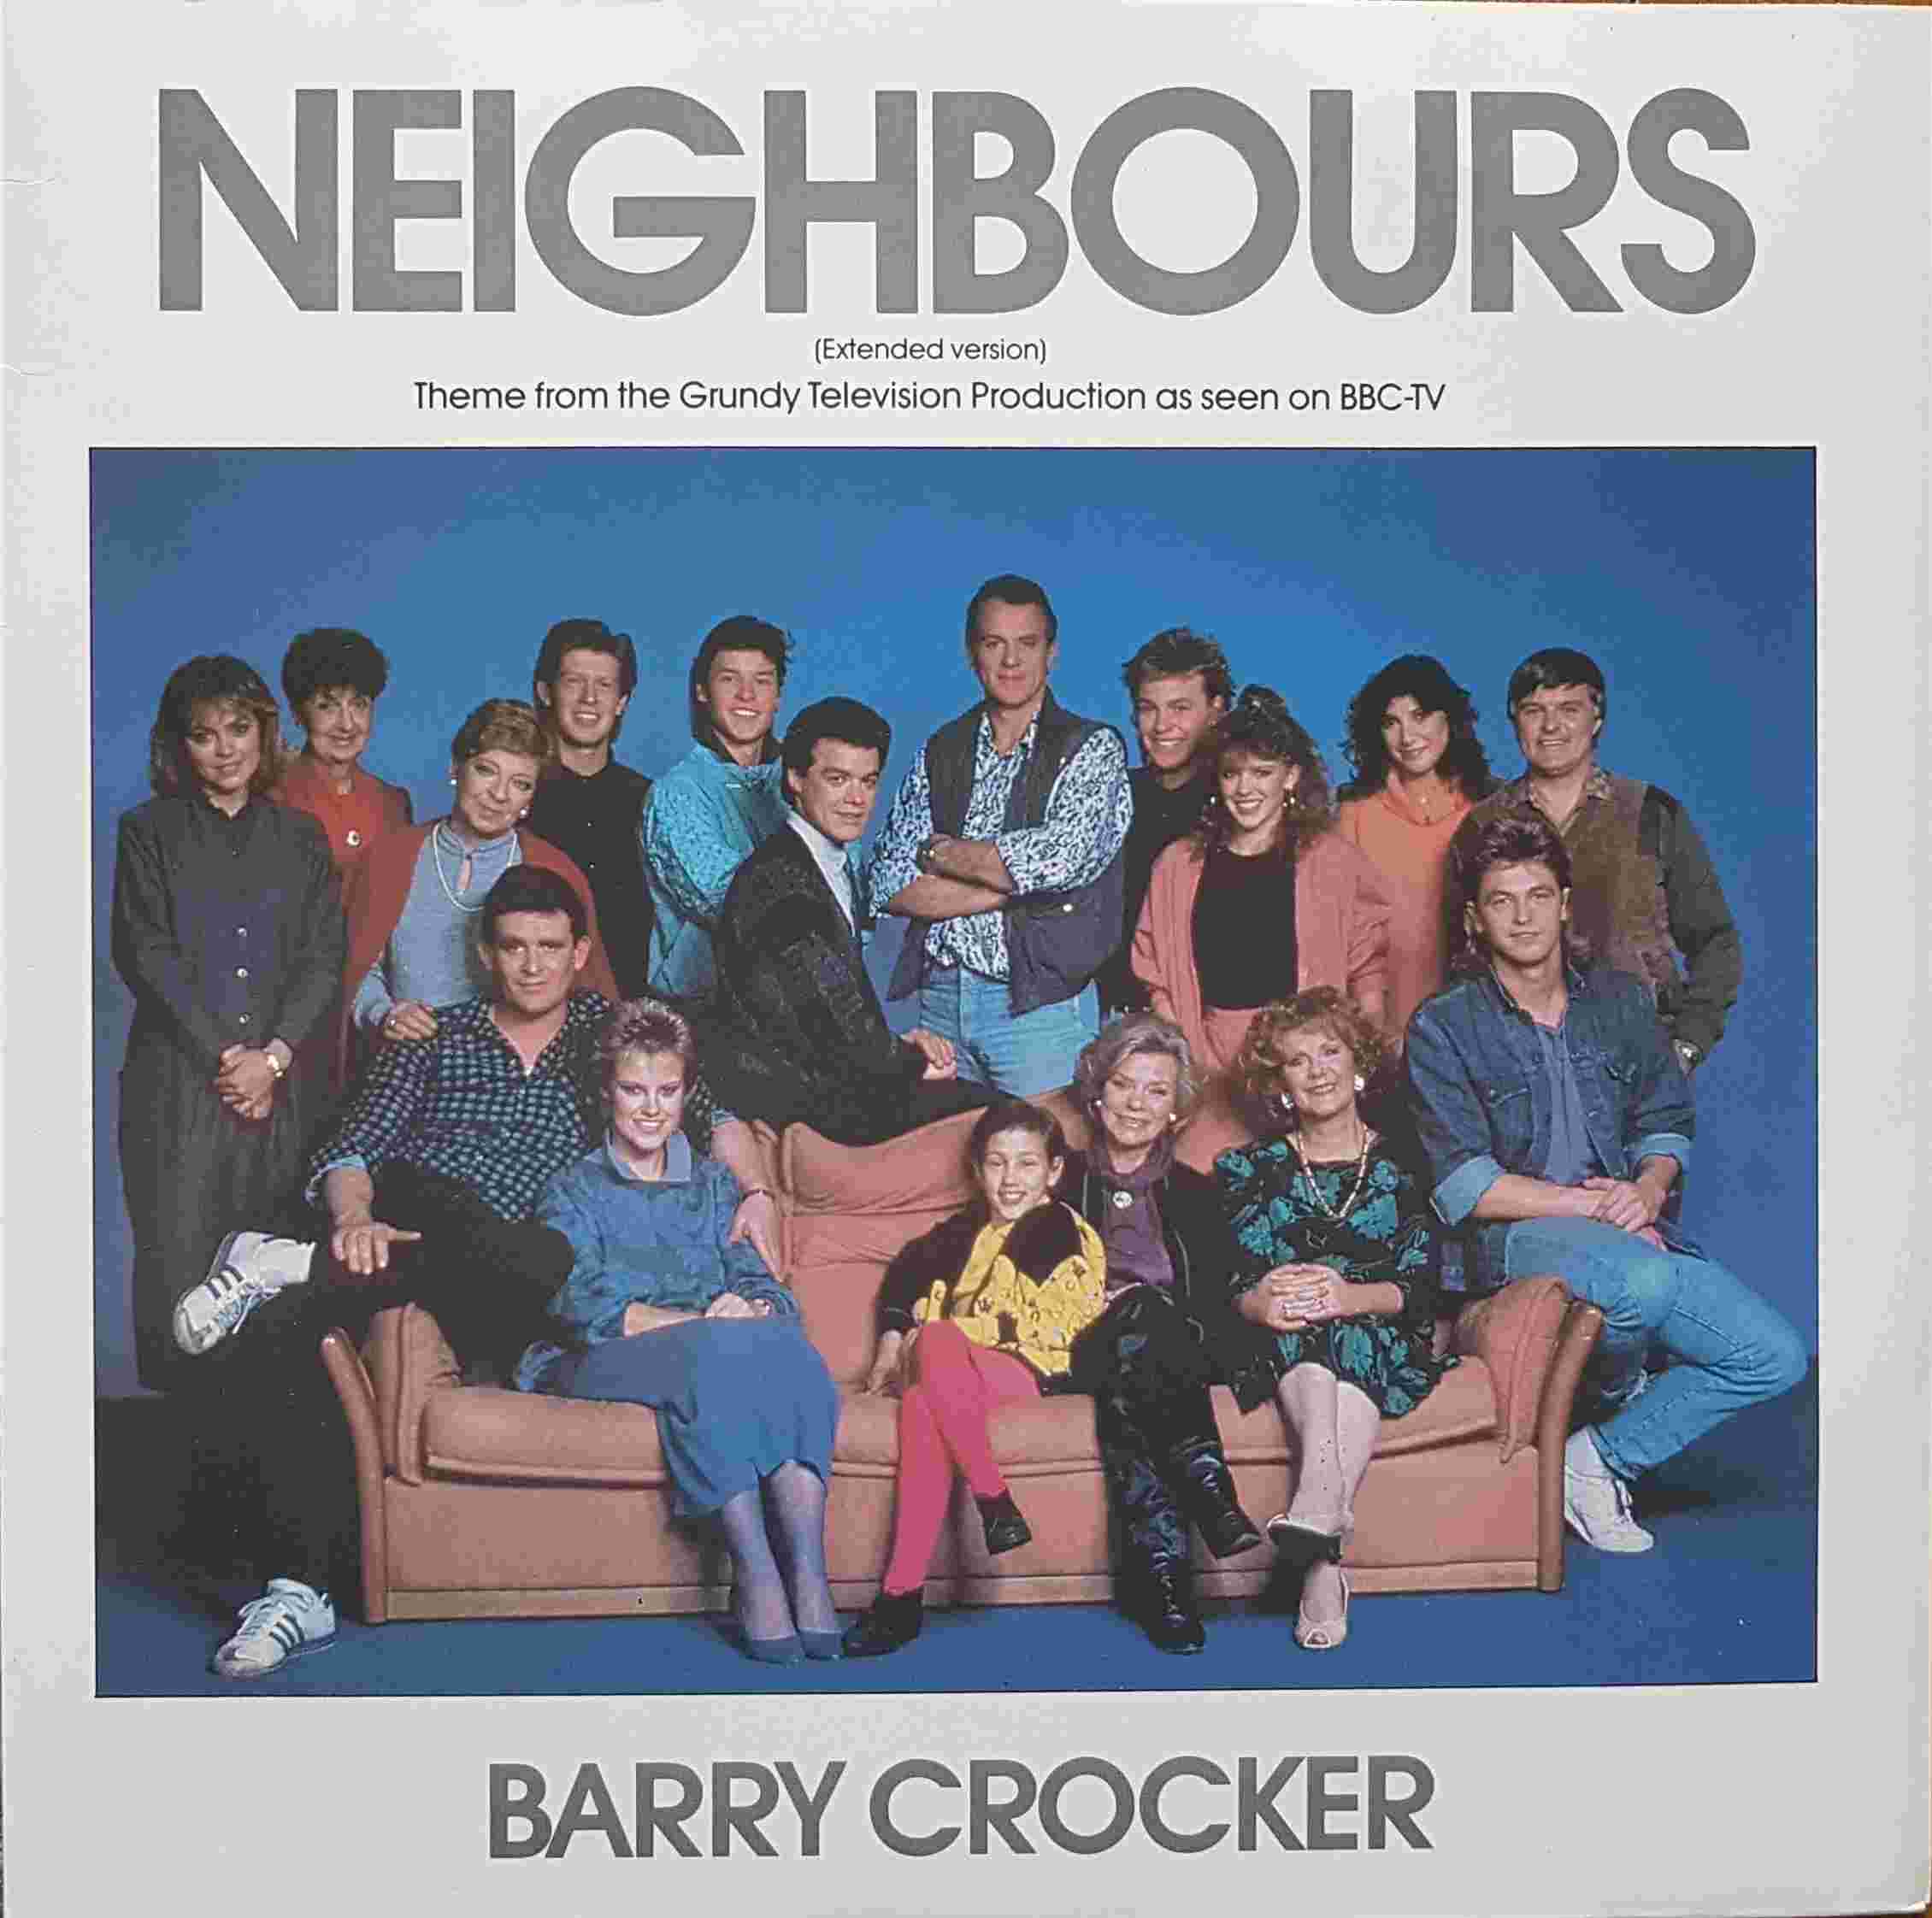 Picture of 12 RSL 210 Neighbours by artist Tony Hatch / Barry Crocker from the BBC 12inches - Records and Tapes library